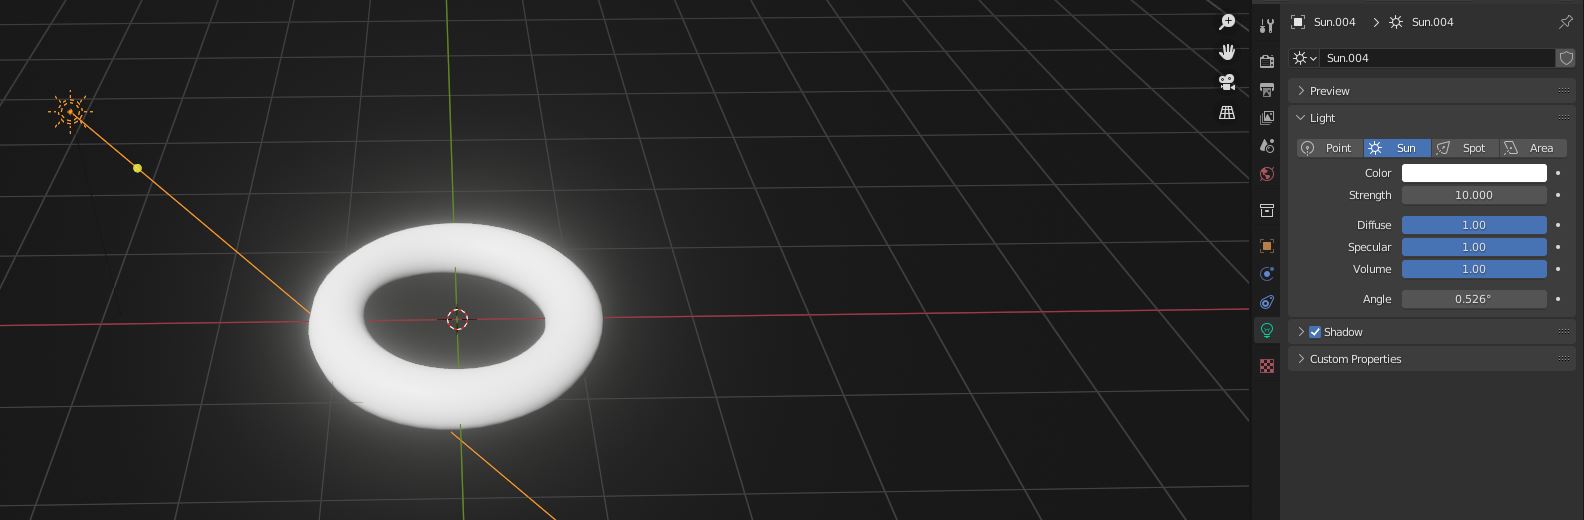 How to make an object glow in Blender - Quora